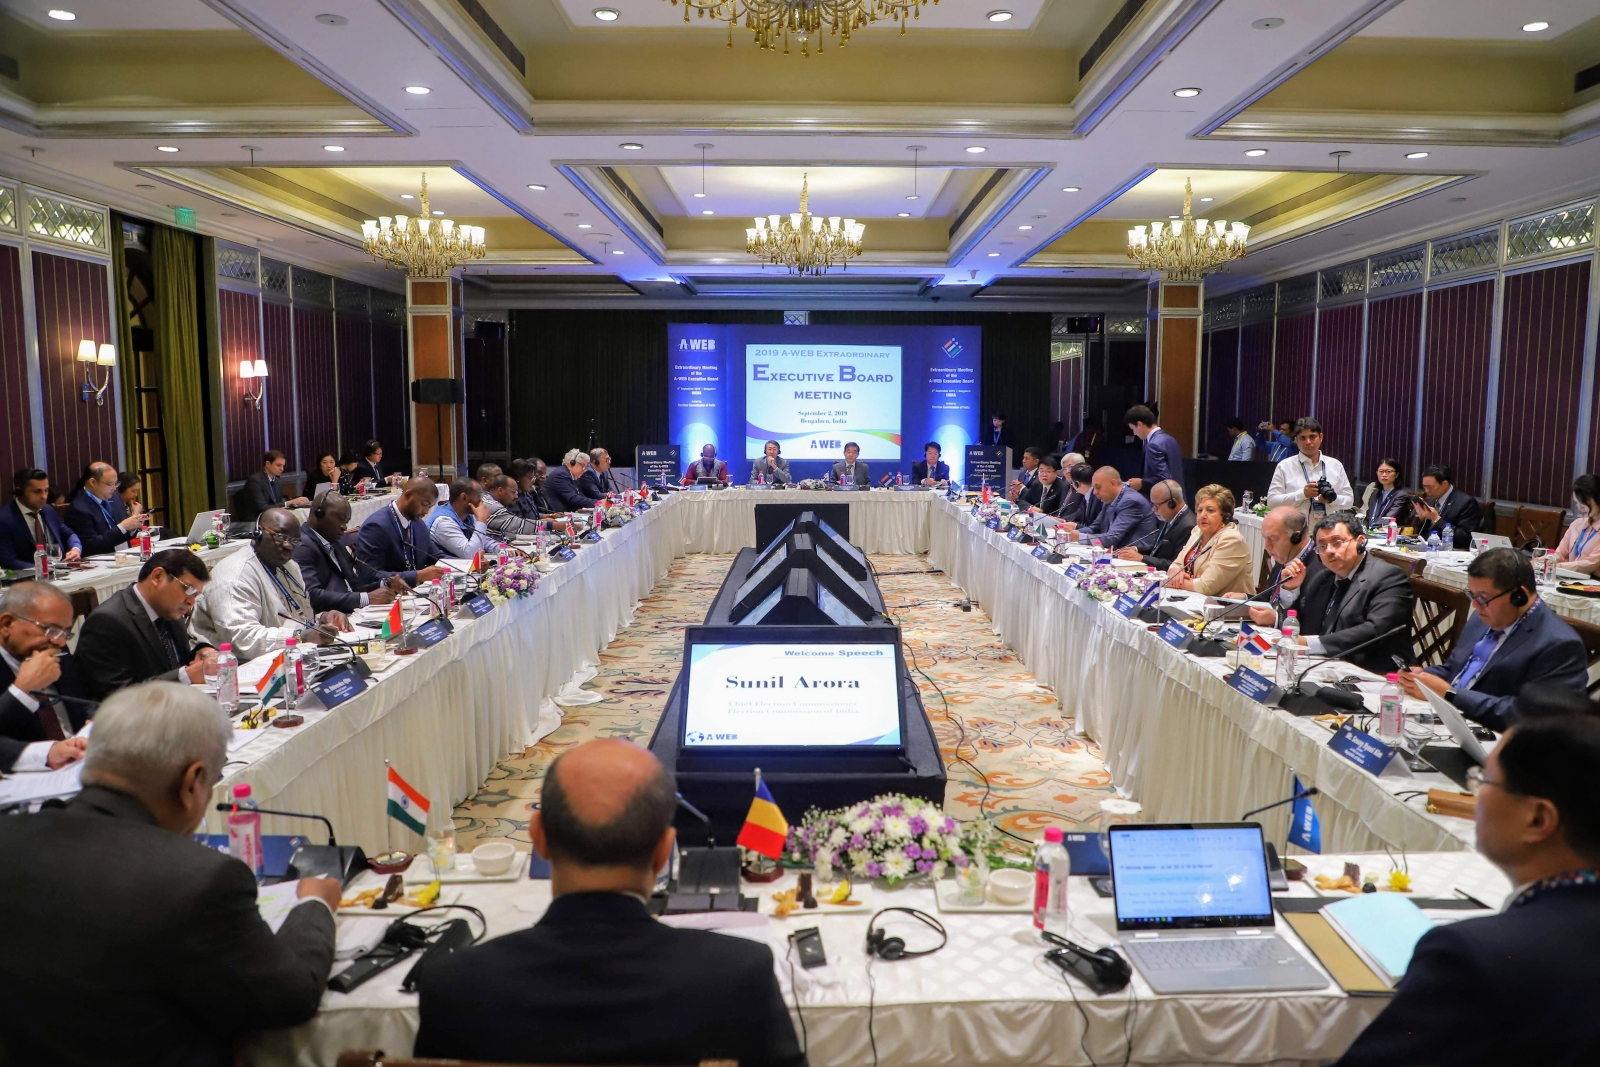 Extraordinary Session of the Executive Board of Association of World Election Bodies in Bengaluru on September 2nd 2019